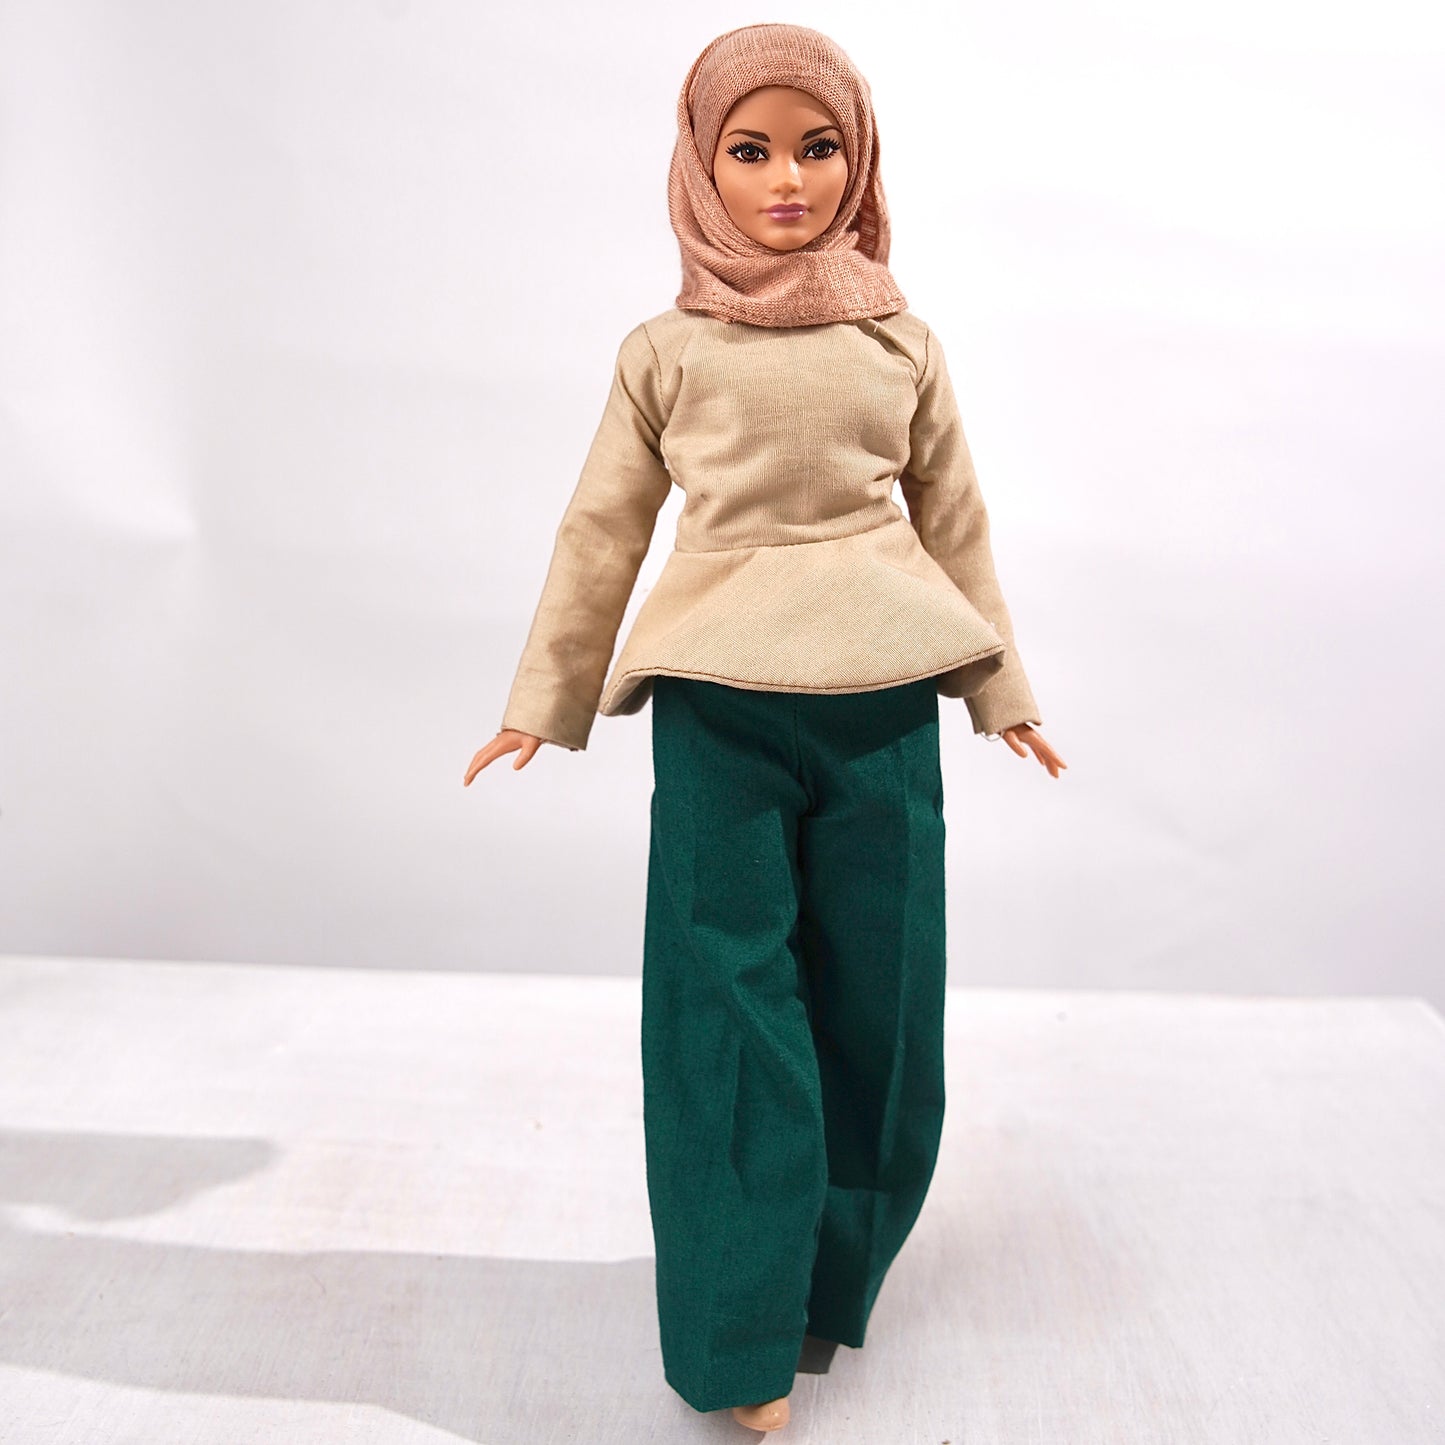 Hijarbie Debut Collection